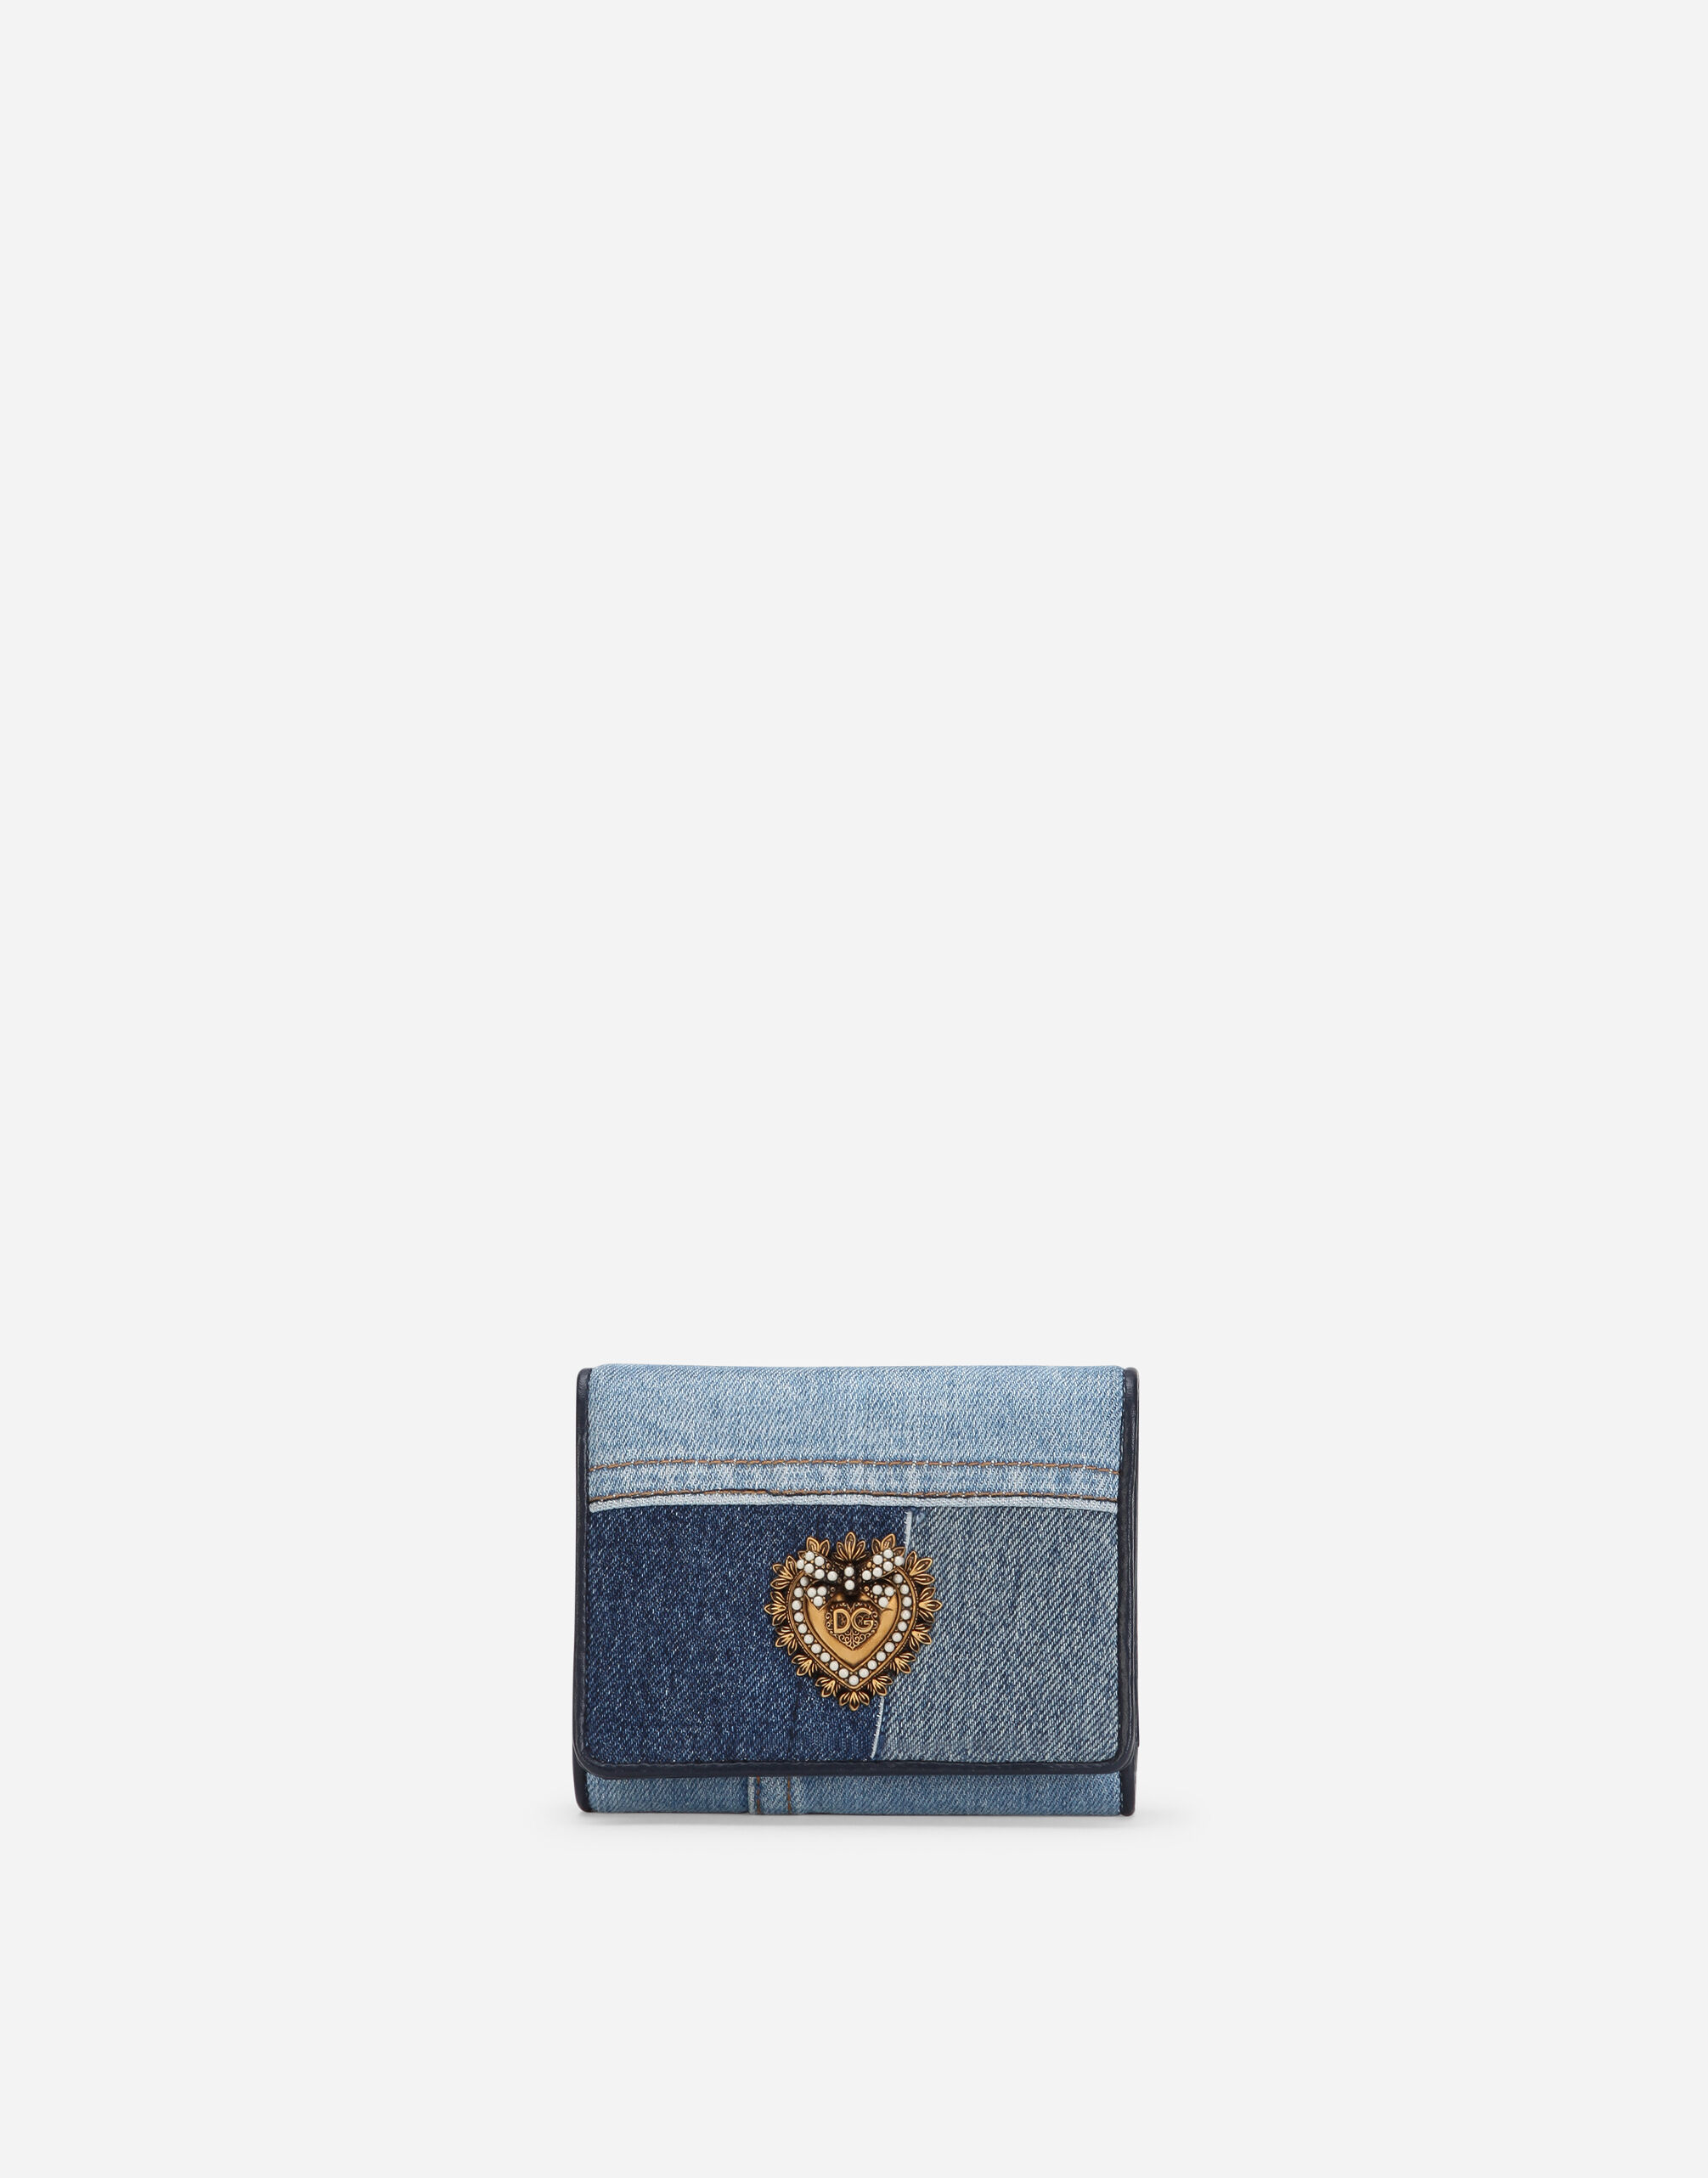 Dolce & Gabbana Small continental Devotion wallet in patchwork denim Multicolor FN092RGDAOU